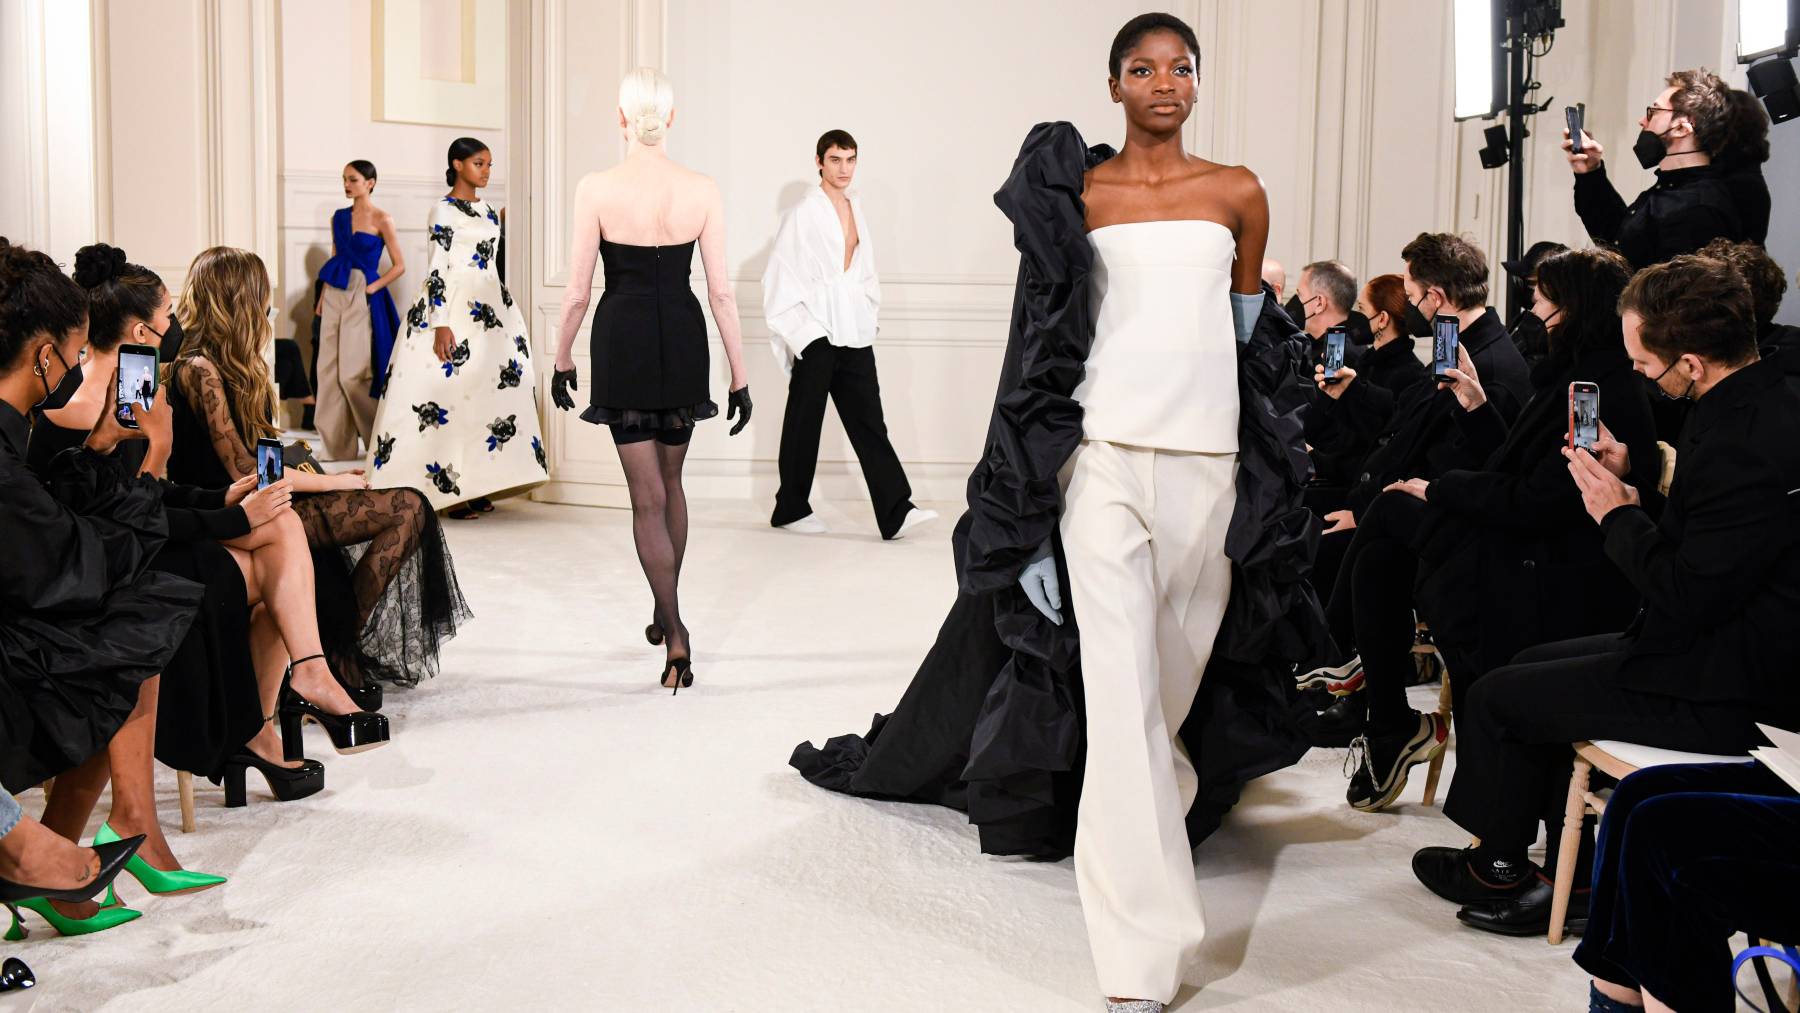 Valentino's Haute Couture spring 2022 collection